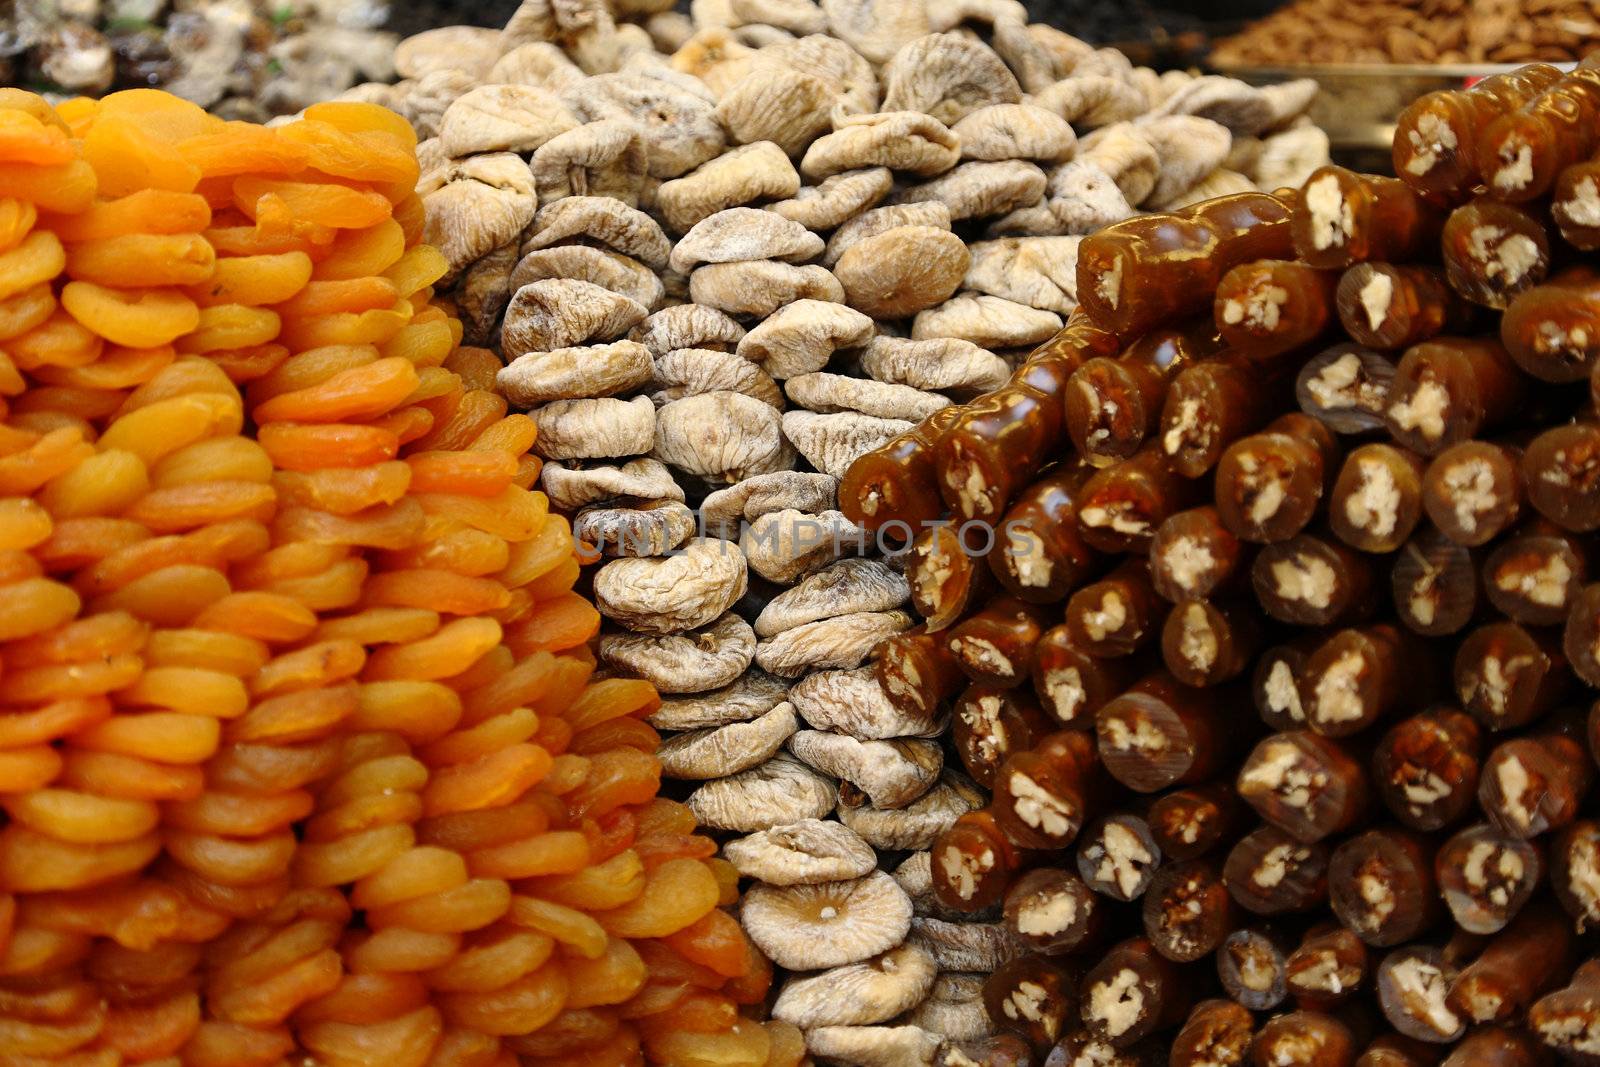 Assortment of dried fruits by shamtor